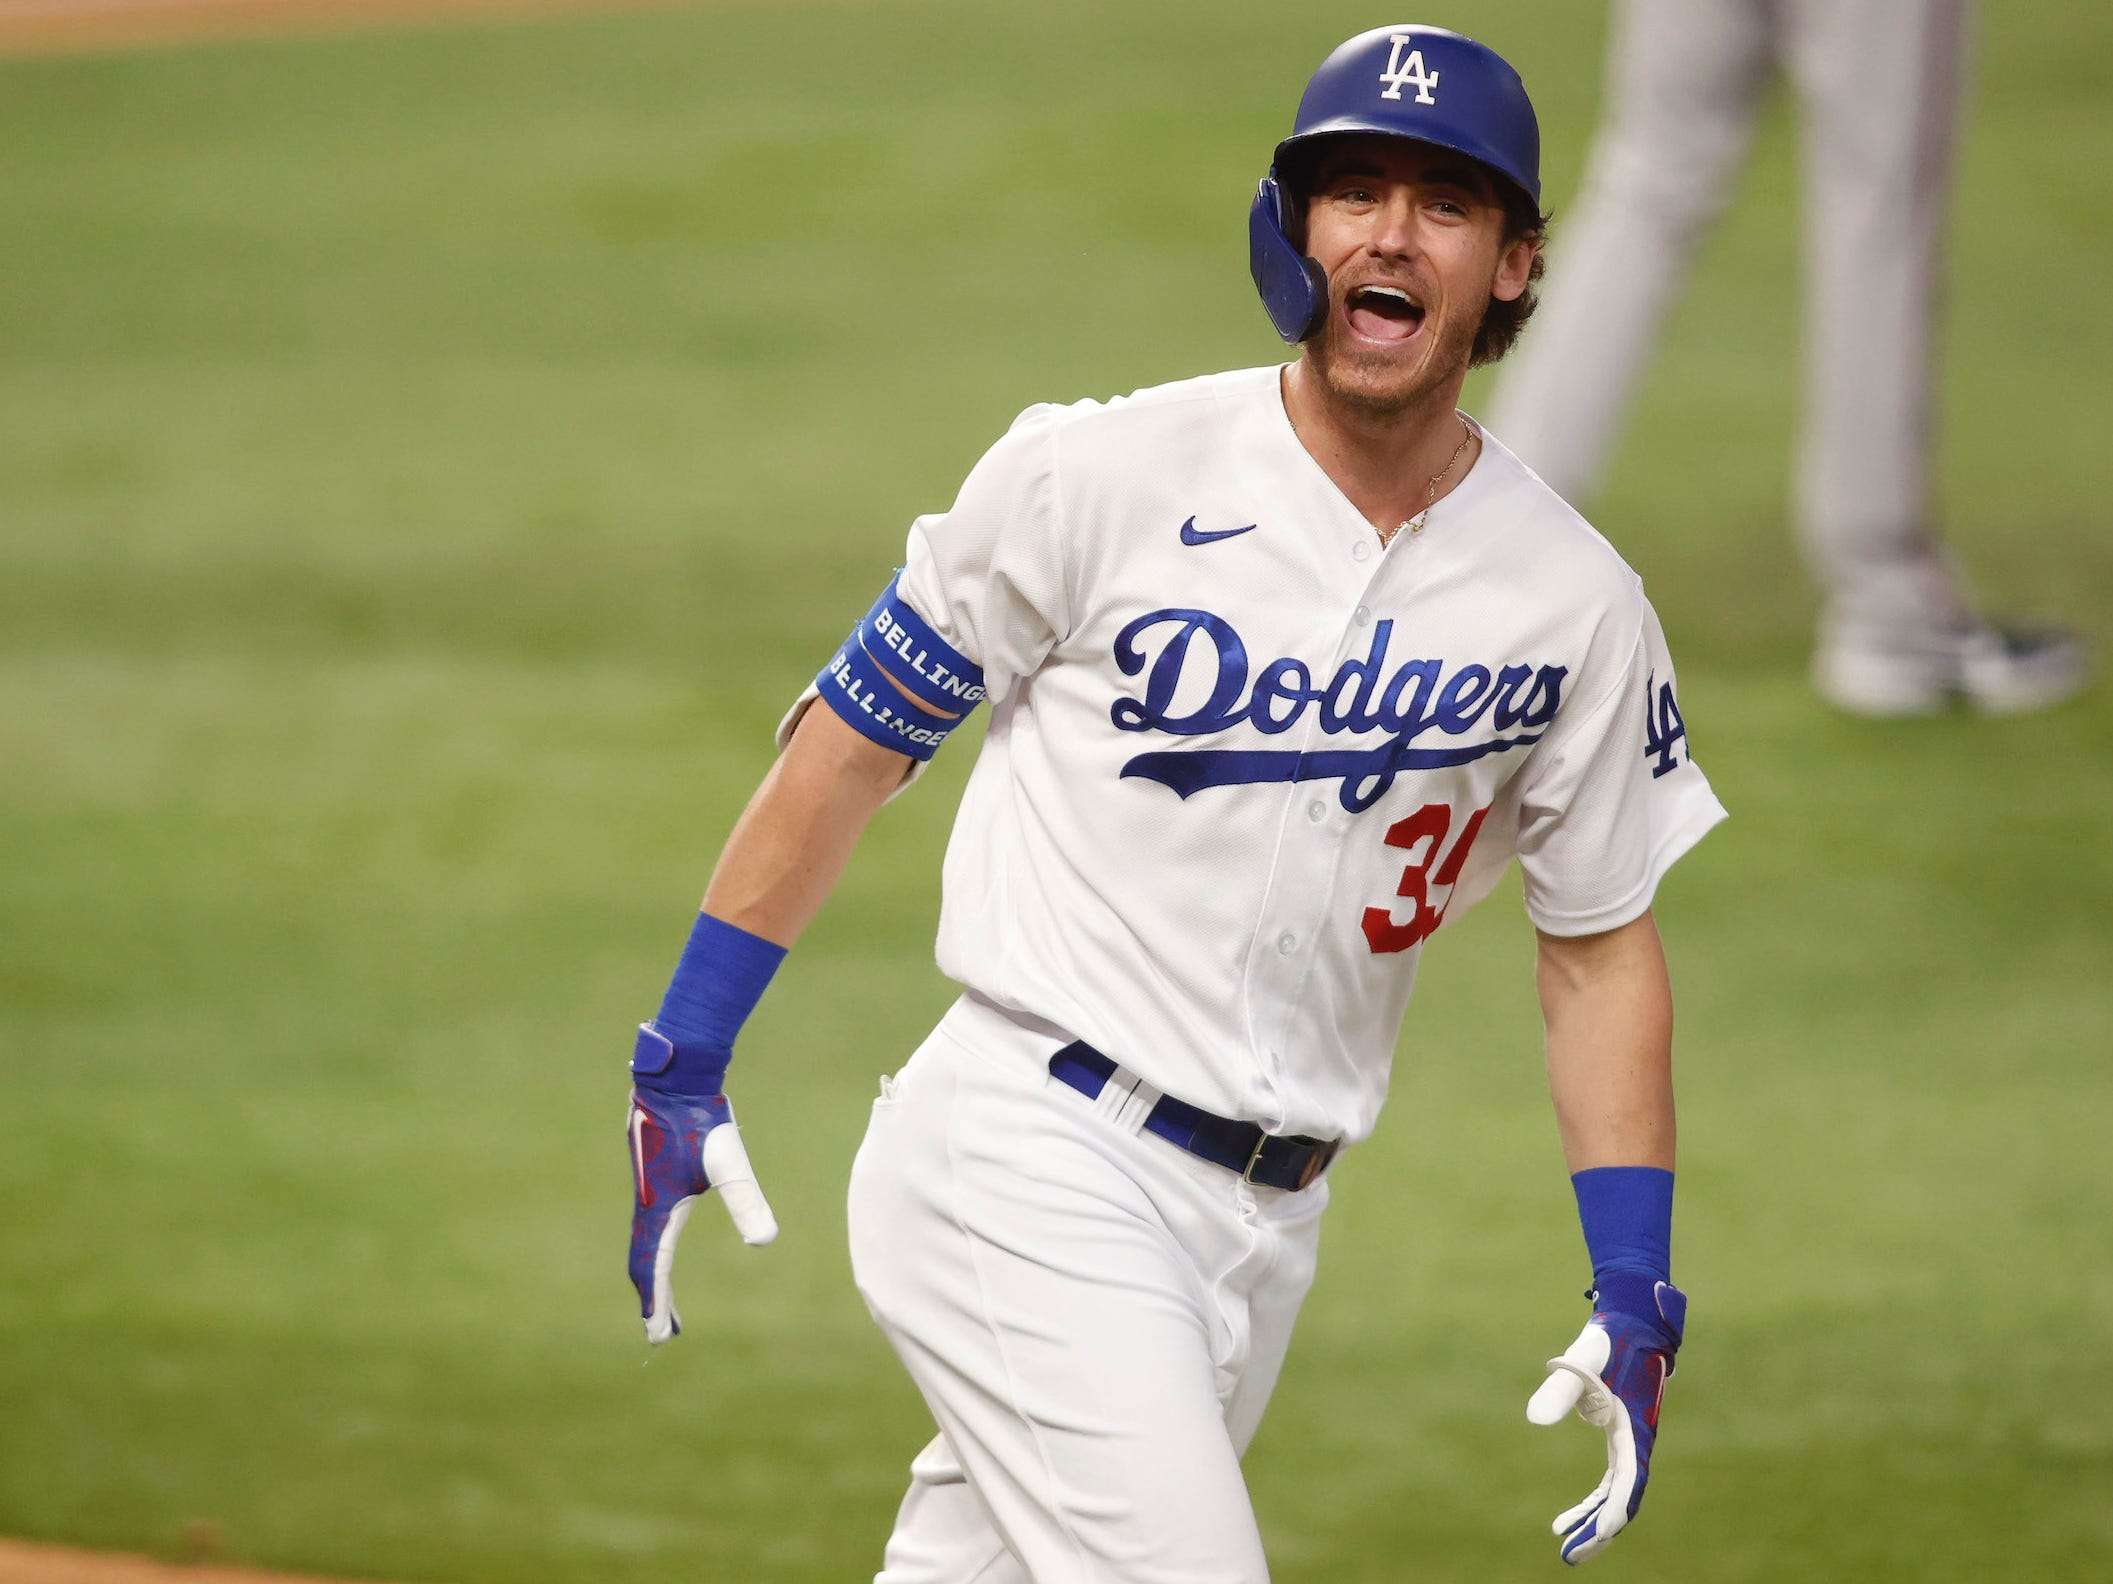 Cody Bellinger dislocated his shoulder while celebrating his game